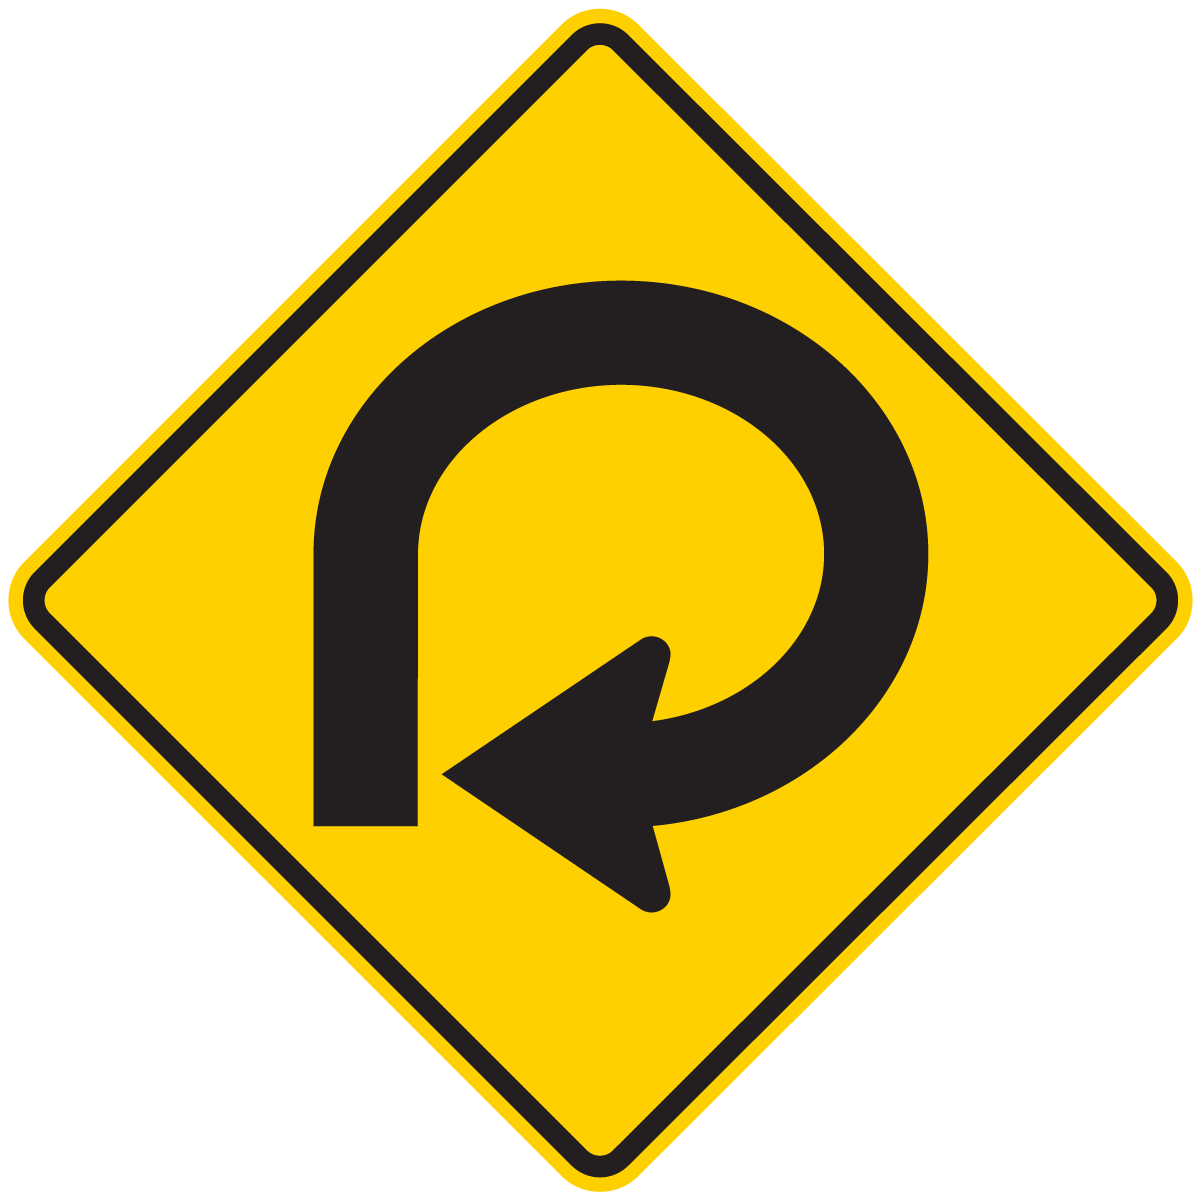 W1-15 270 Degree (Loop) Curve (Left or Right)